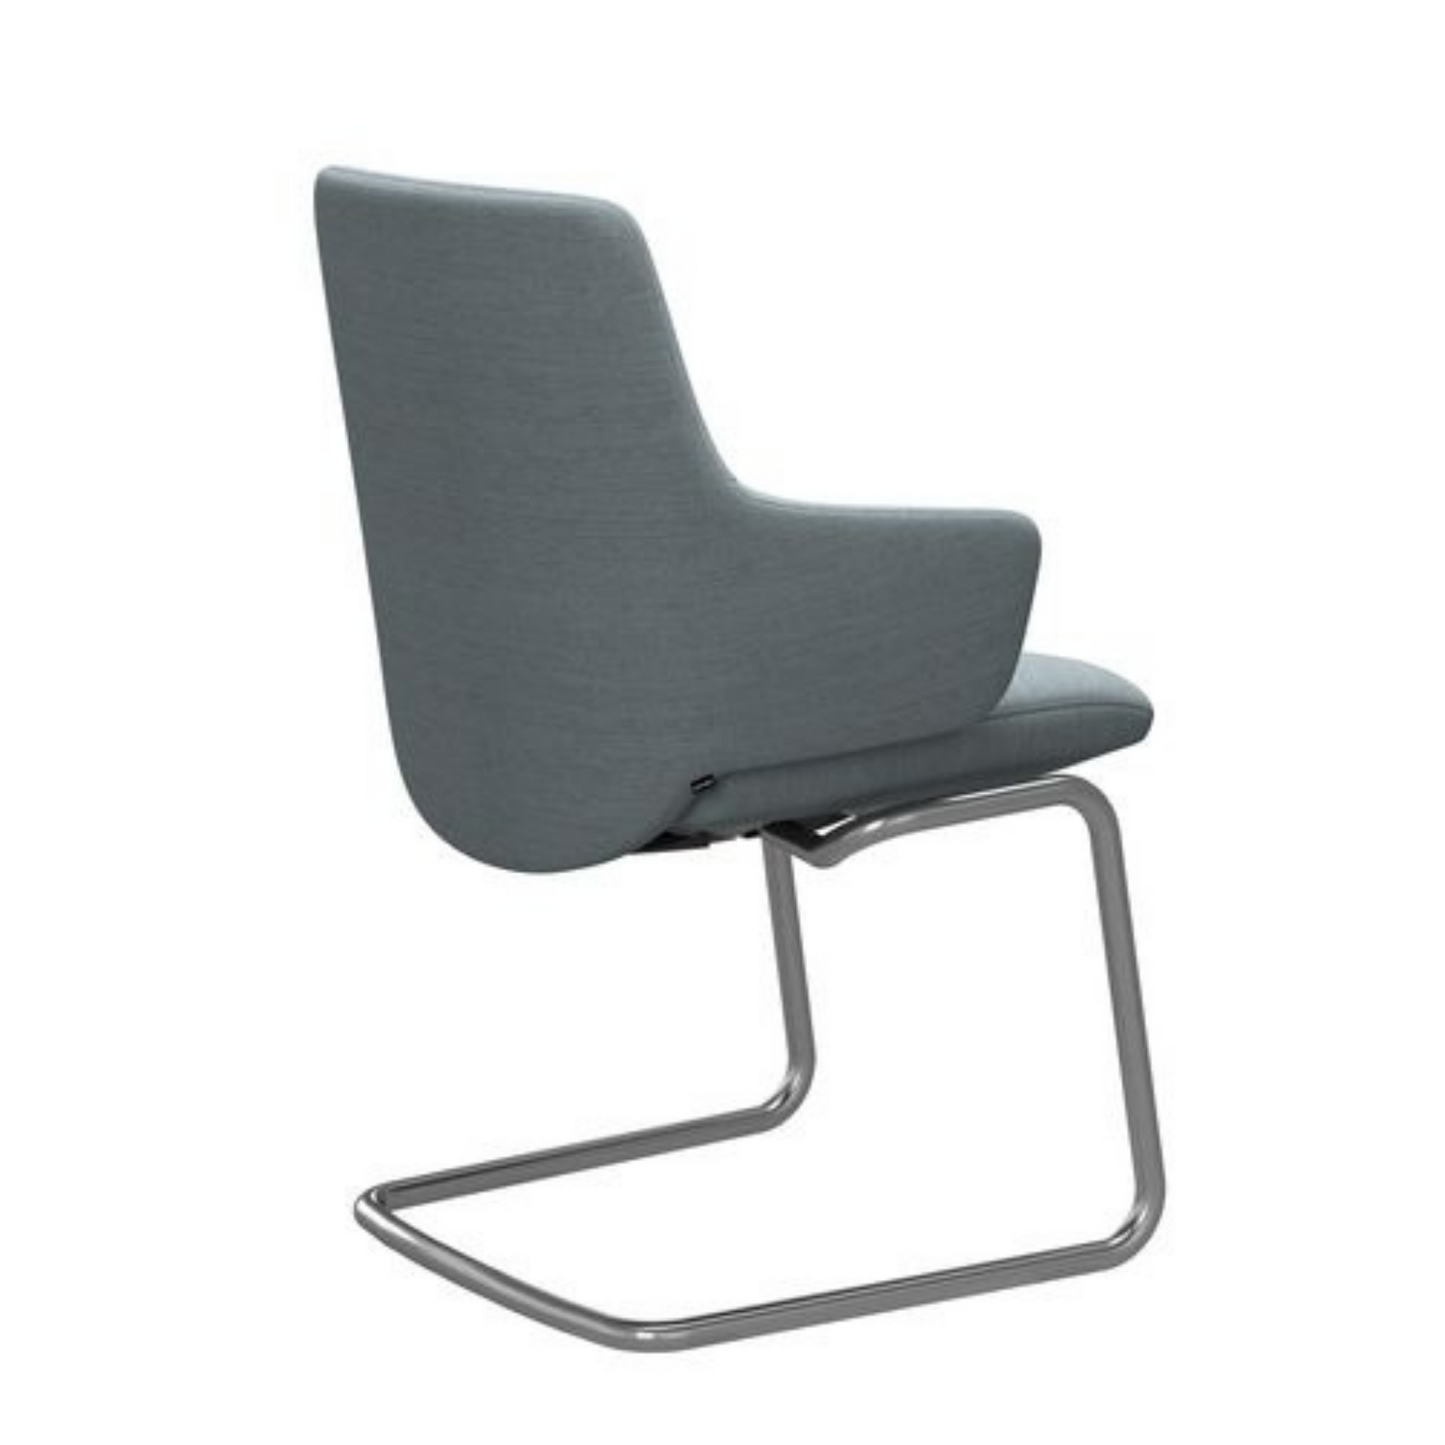 Laurel Dining Chair with Arms D400 Leg by Stressless